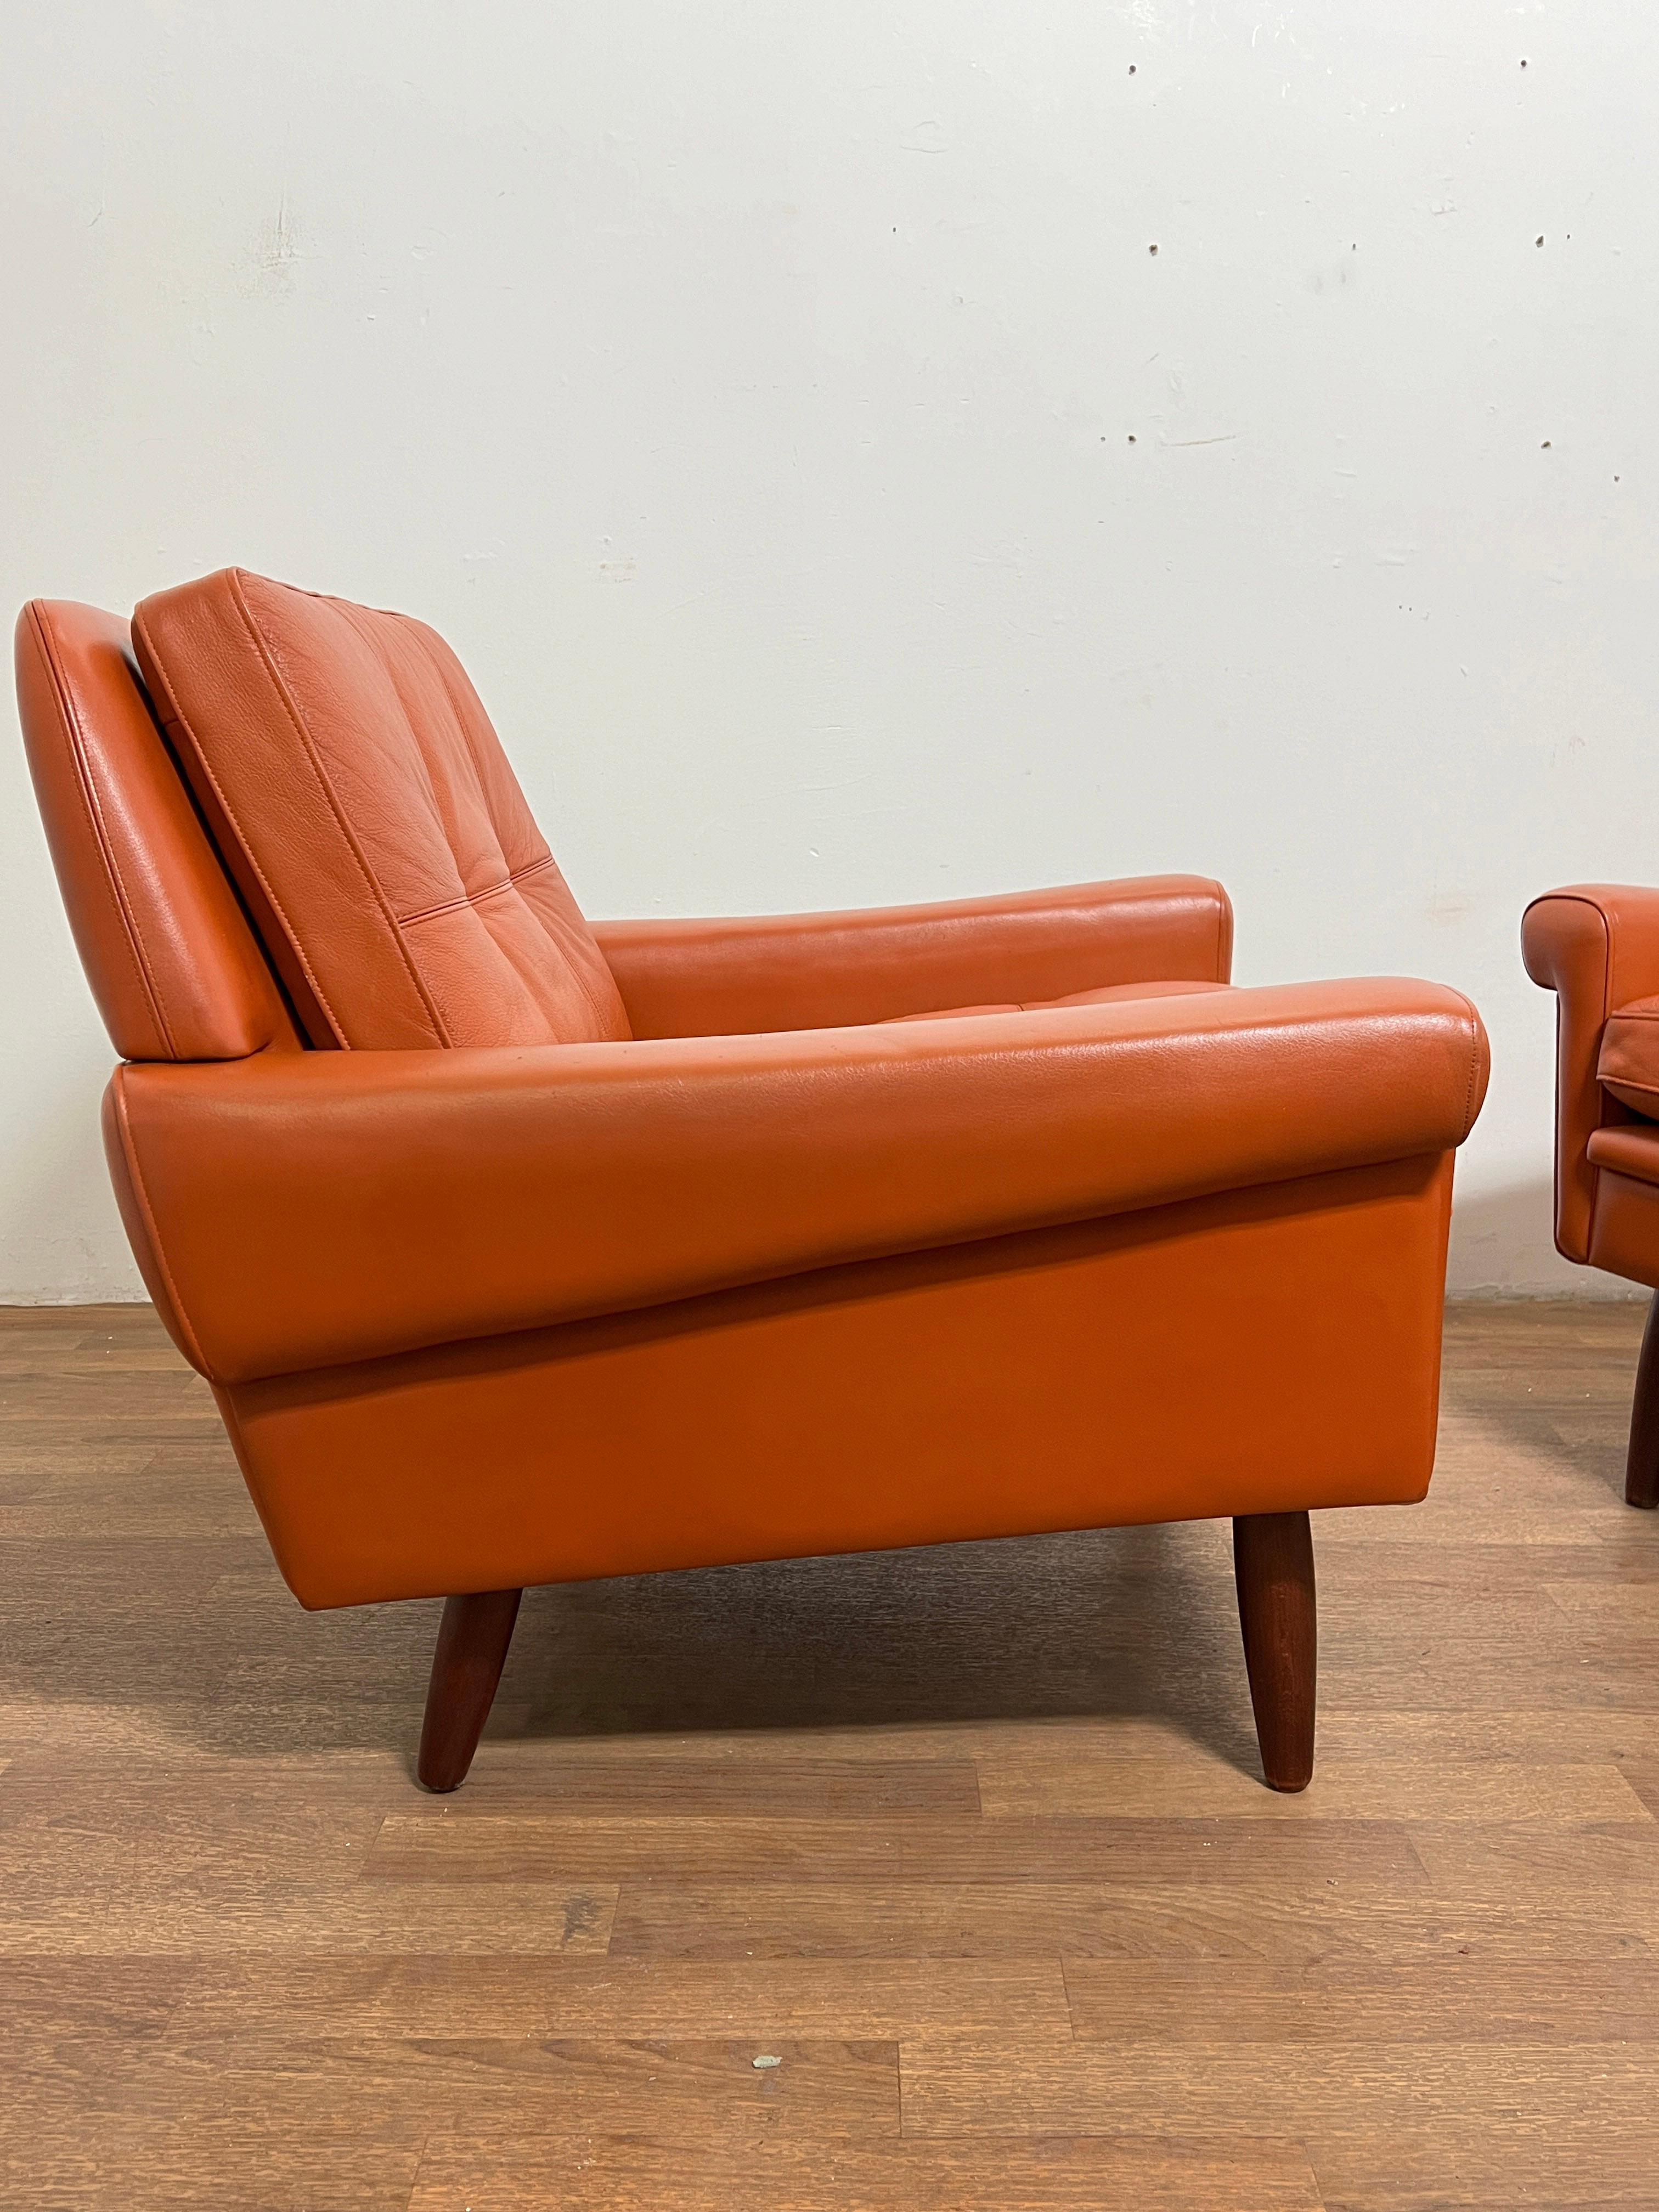 Pair of Danish Leather Lounge Chairs by Svend Skipper, Circa 1960s In Good Condition For Sale In Peabody, MA